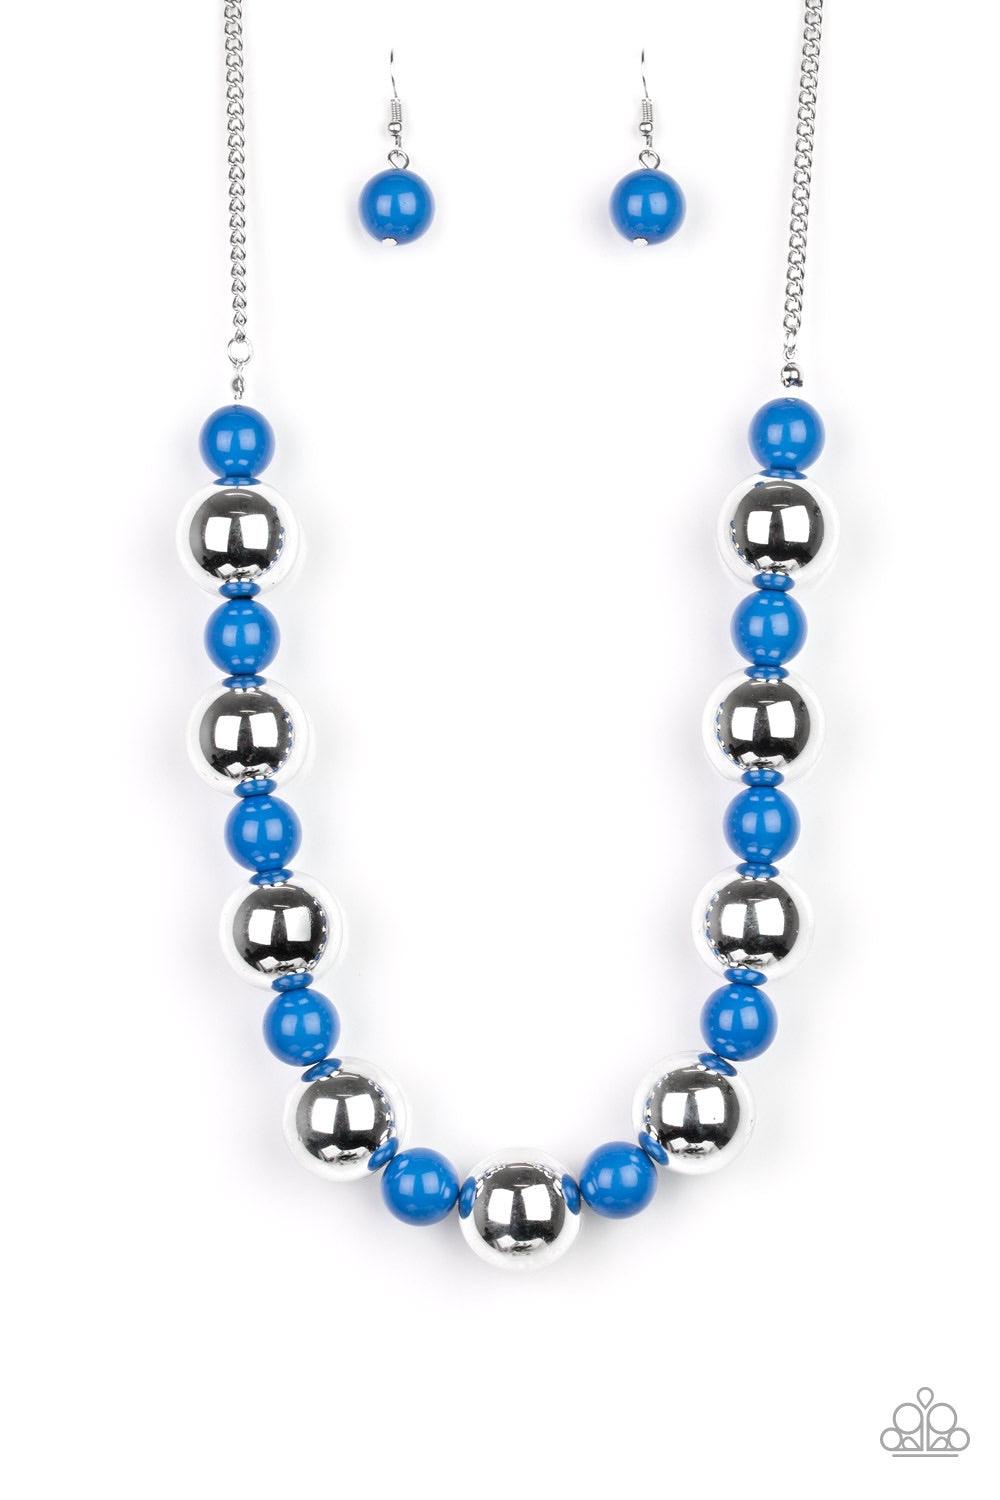 Paparazzi Accessories Top Pop - Blue Polished blue beads and dramatic silver beads drape below the collar for a perfect pop of color. Features an adjustable clasp closure. Jewelry